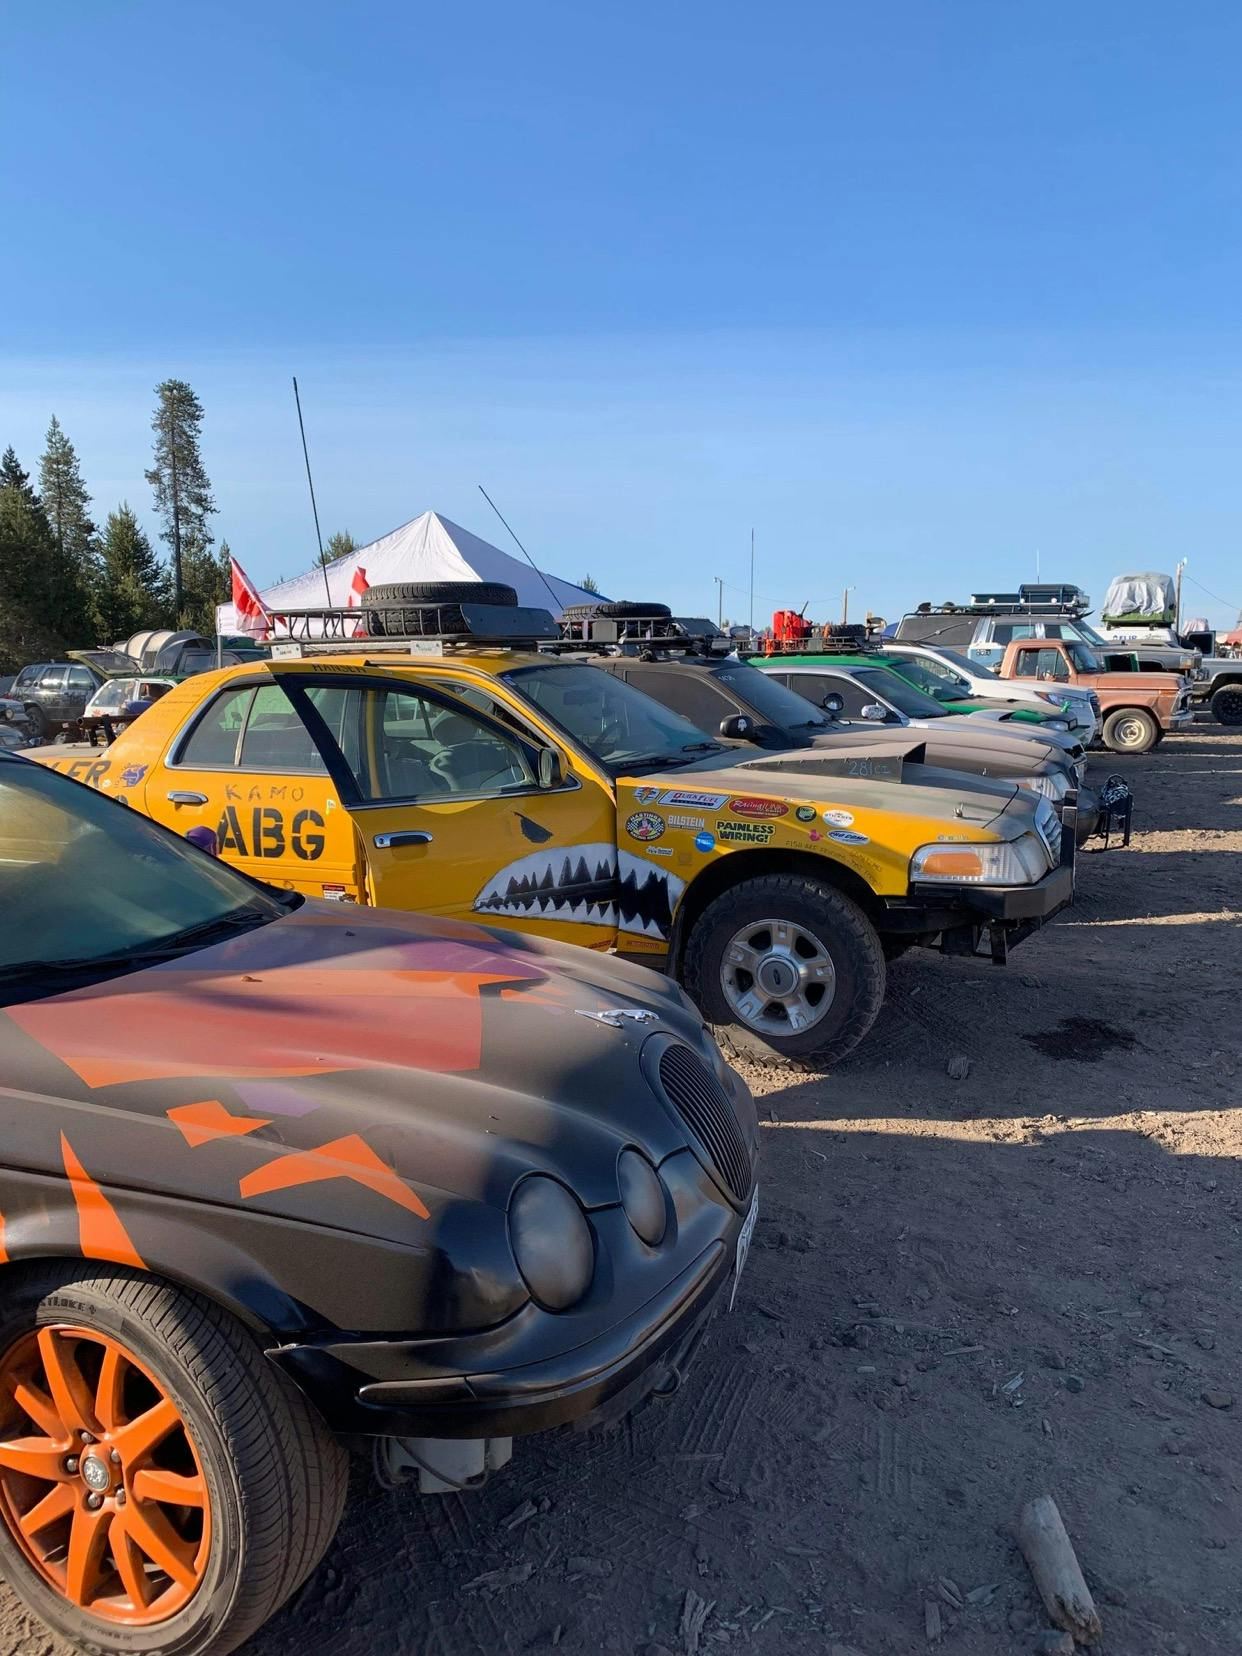 Dusty off-roading vehicles meet for the Gambler 500